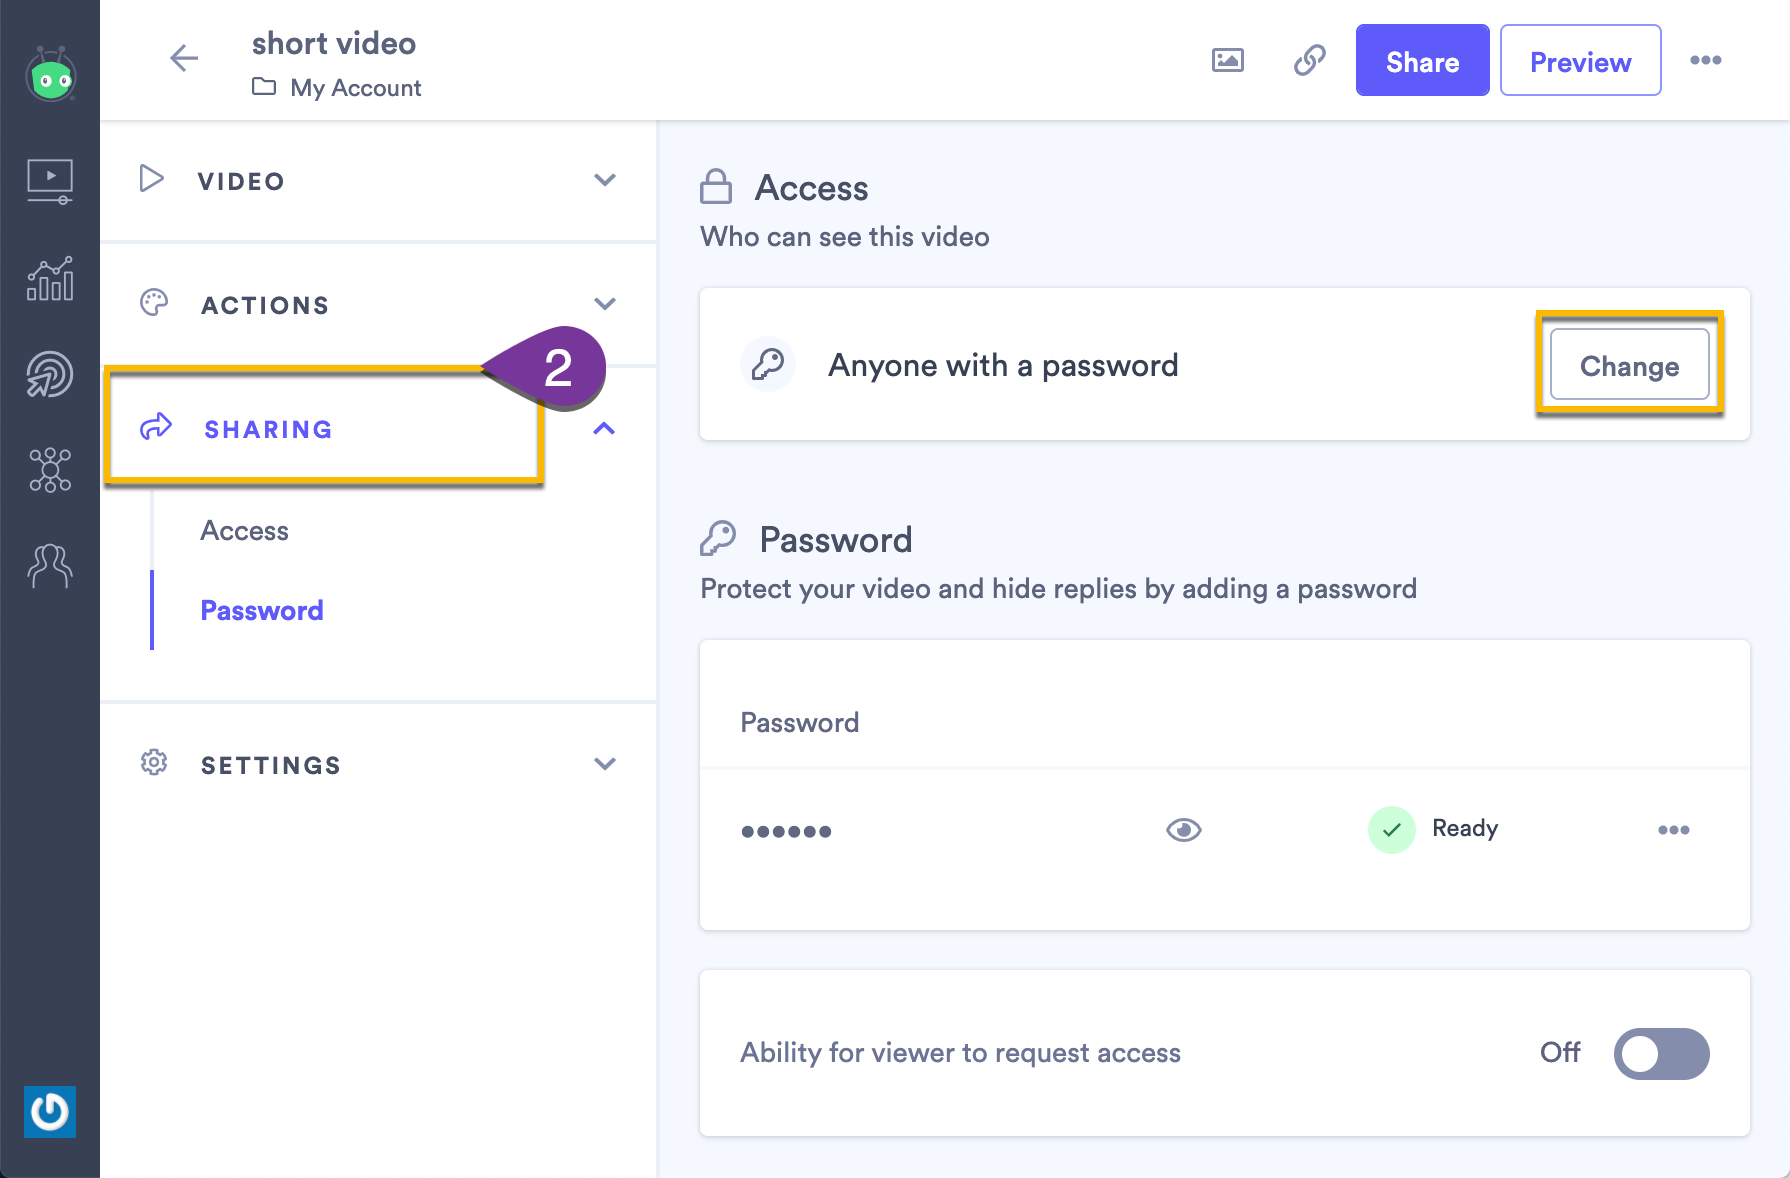 Changing the video access setting to Anyone with a password, if it is not already selected